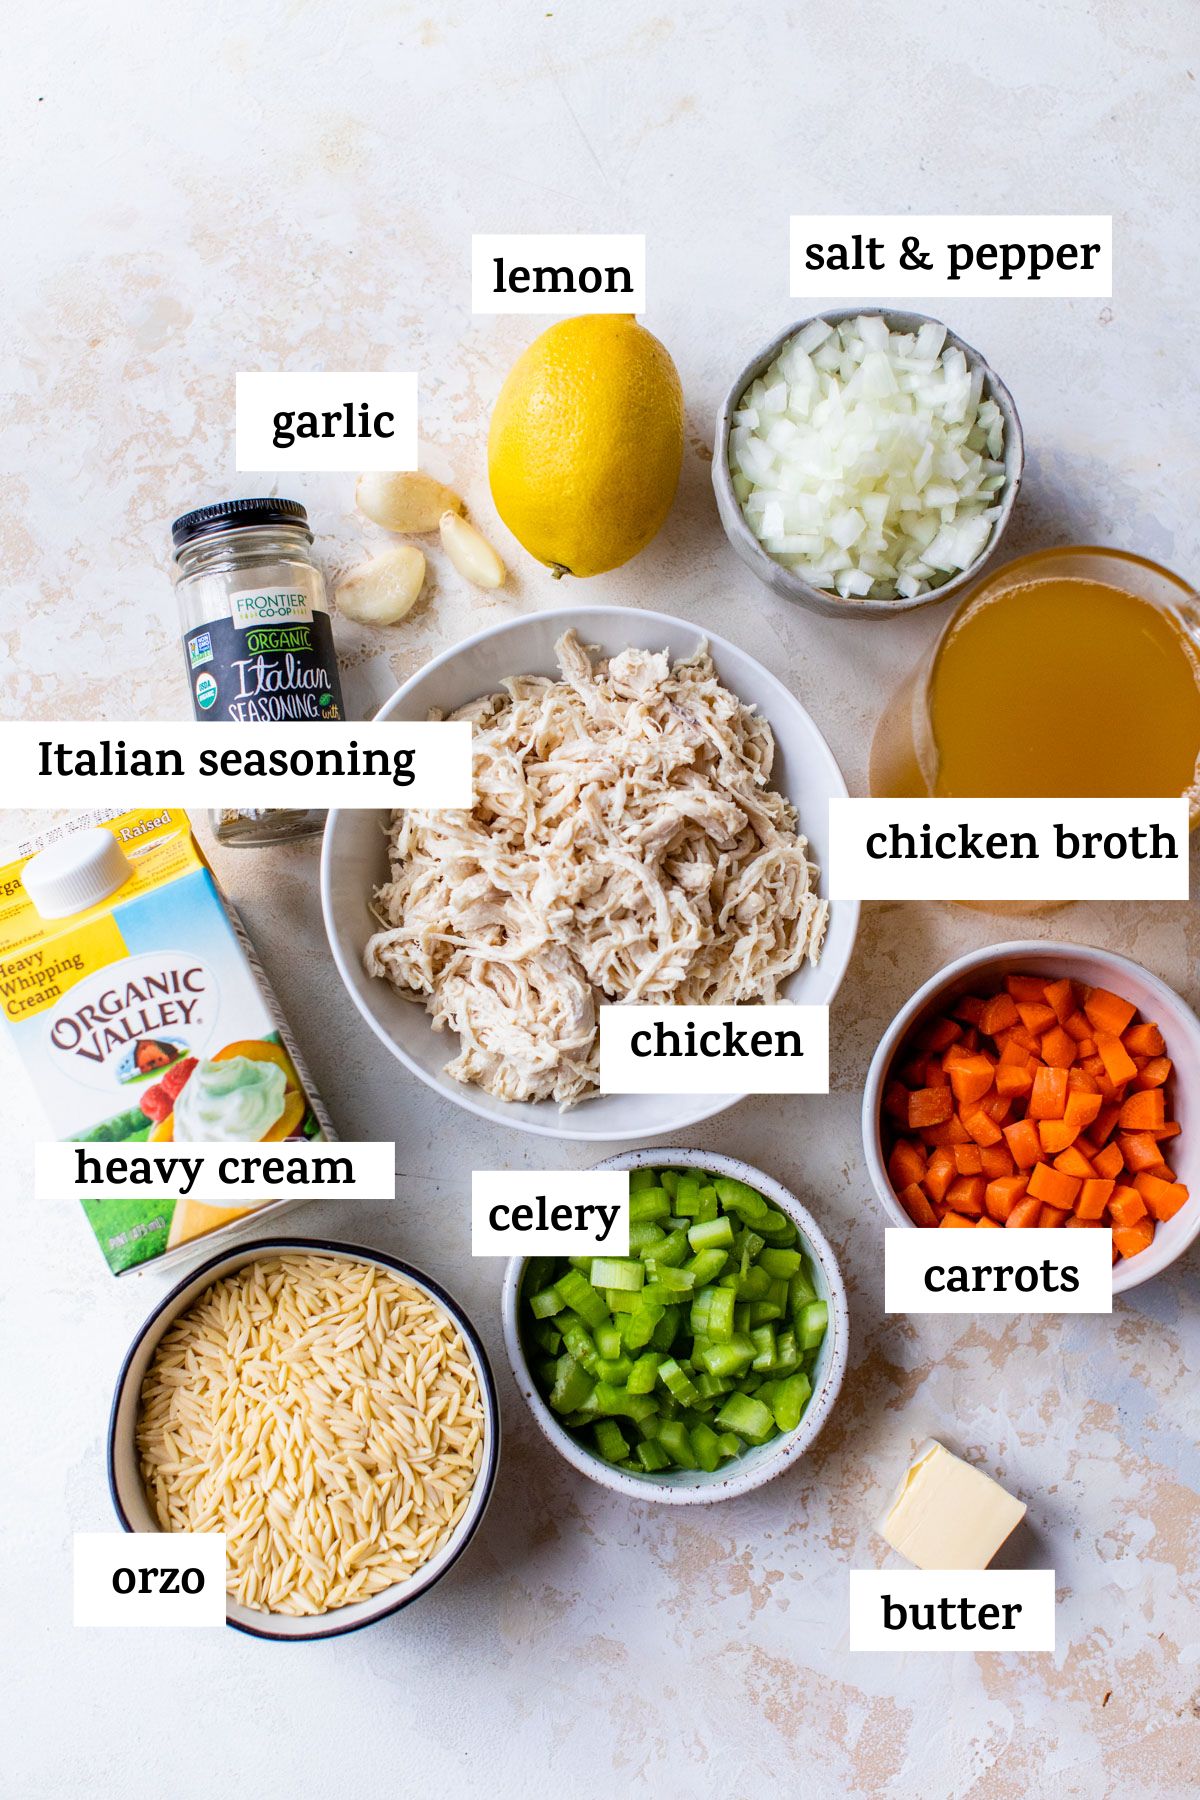 ingredients to make chicken orzo soup, like orzo, shredded chicken and chicken broth